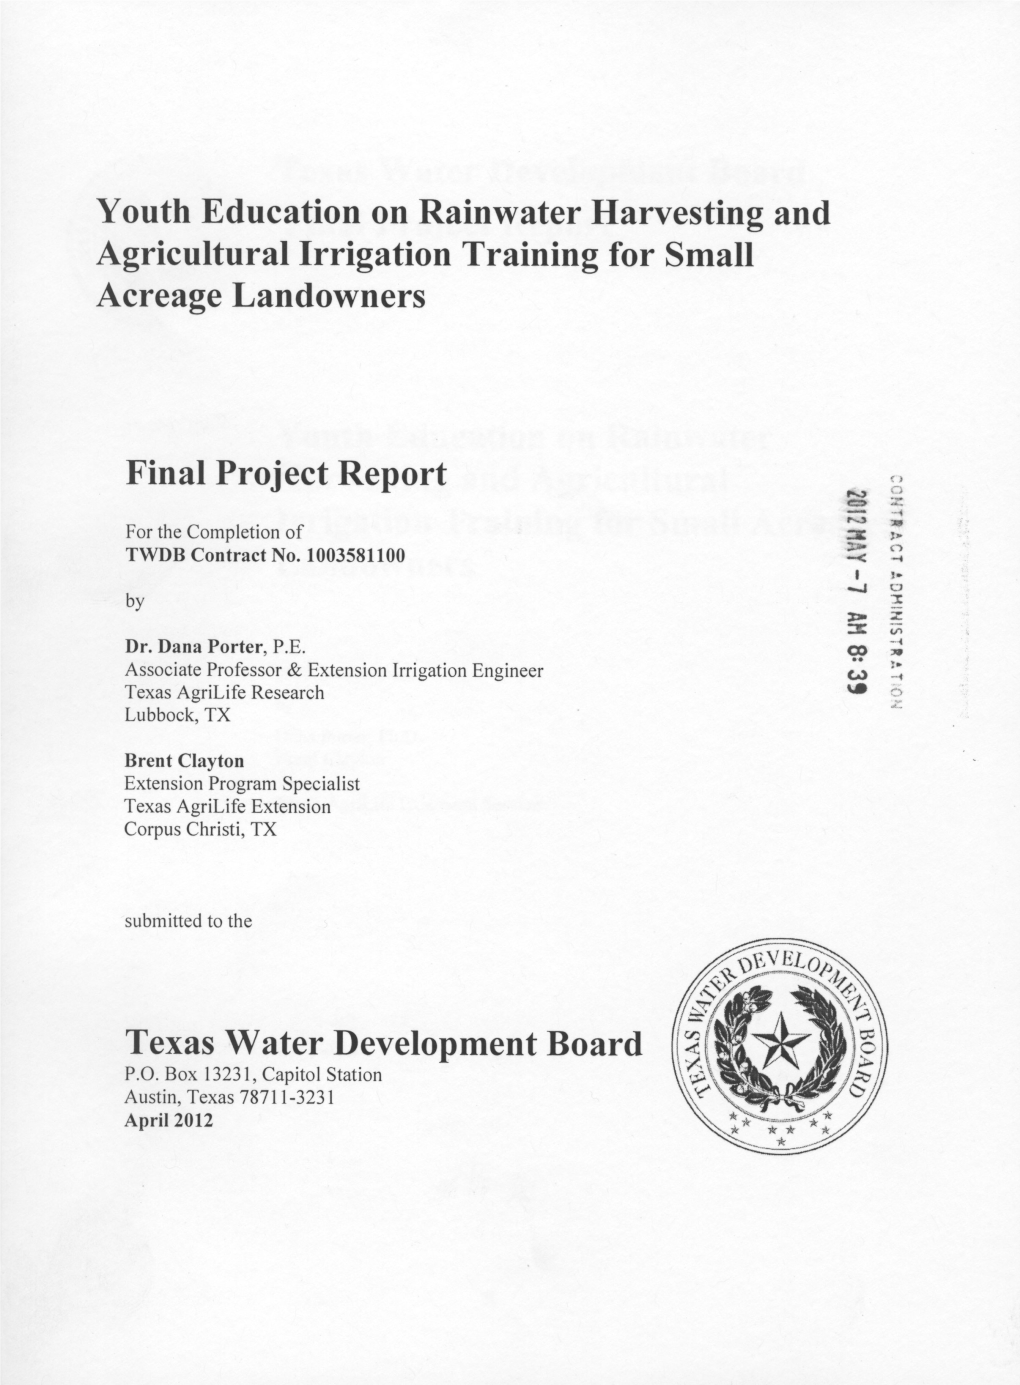 Youth Education on Rainwater Harvesting and Agricultural Irrigation Training for Small Acreage Landowners